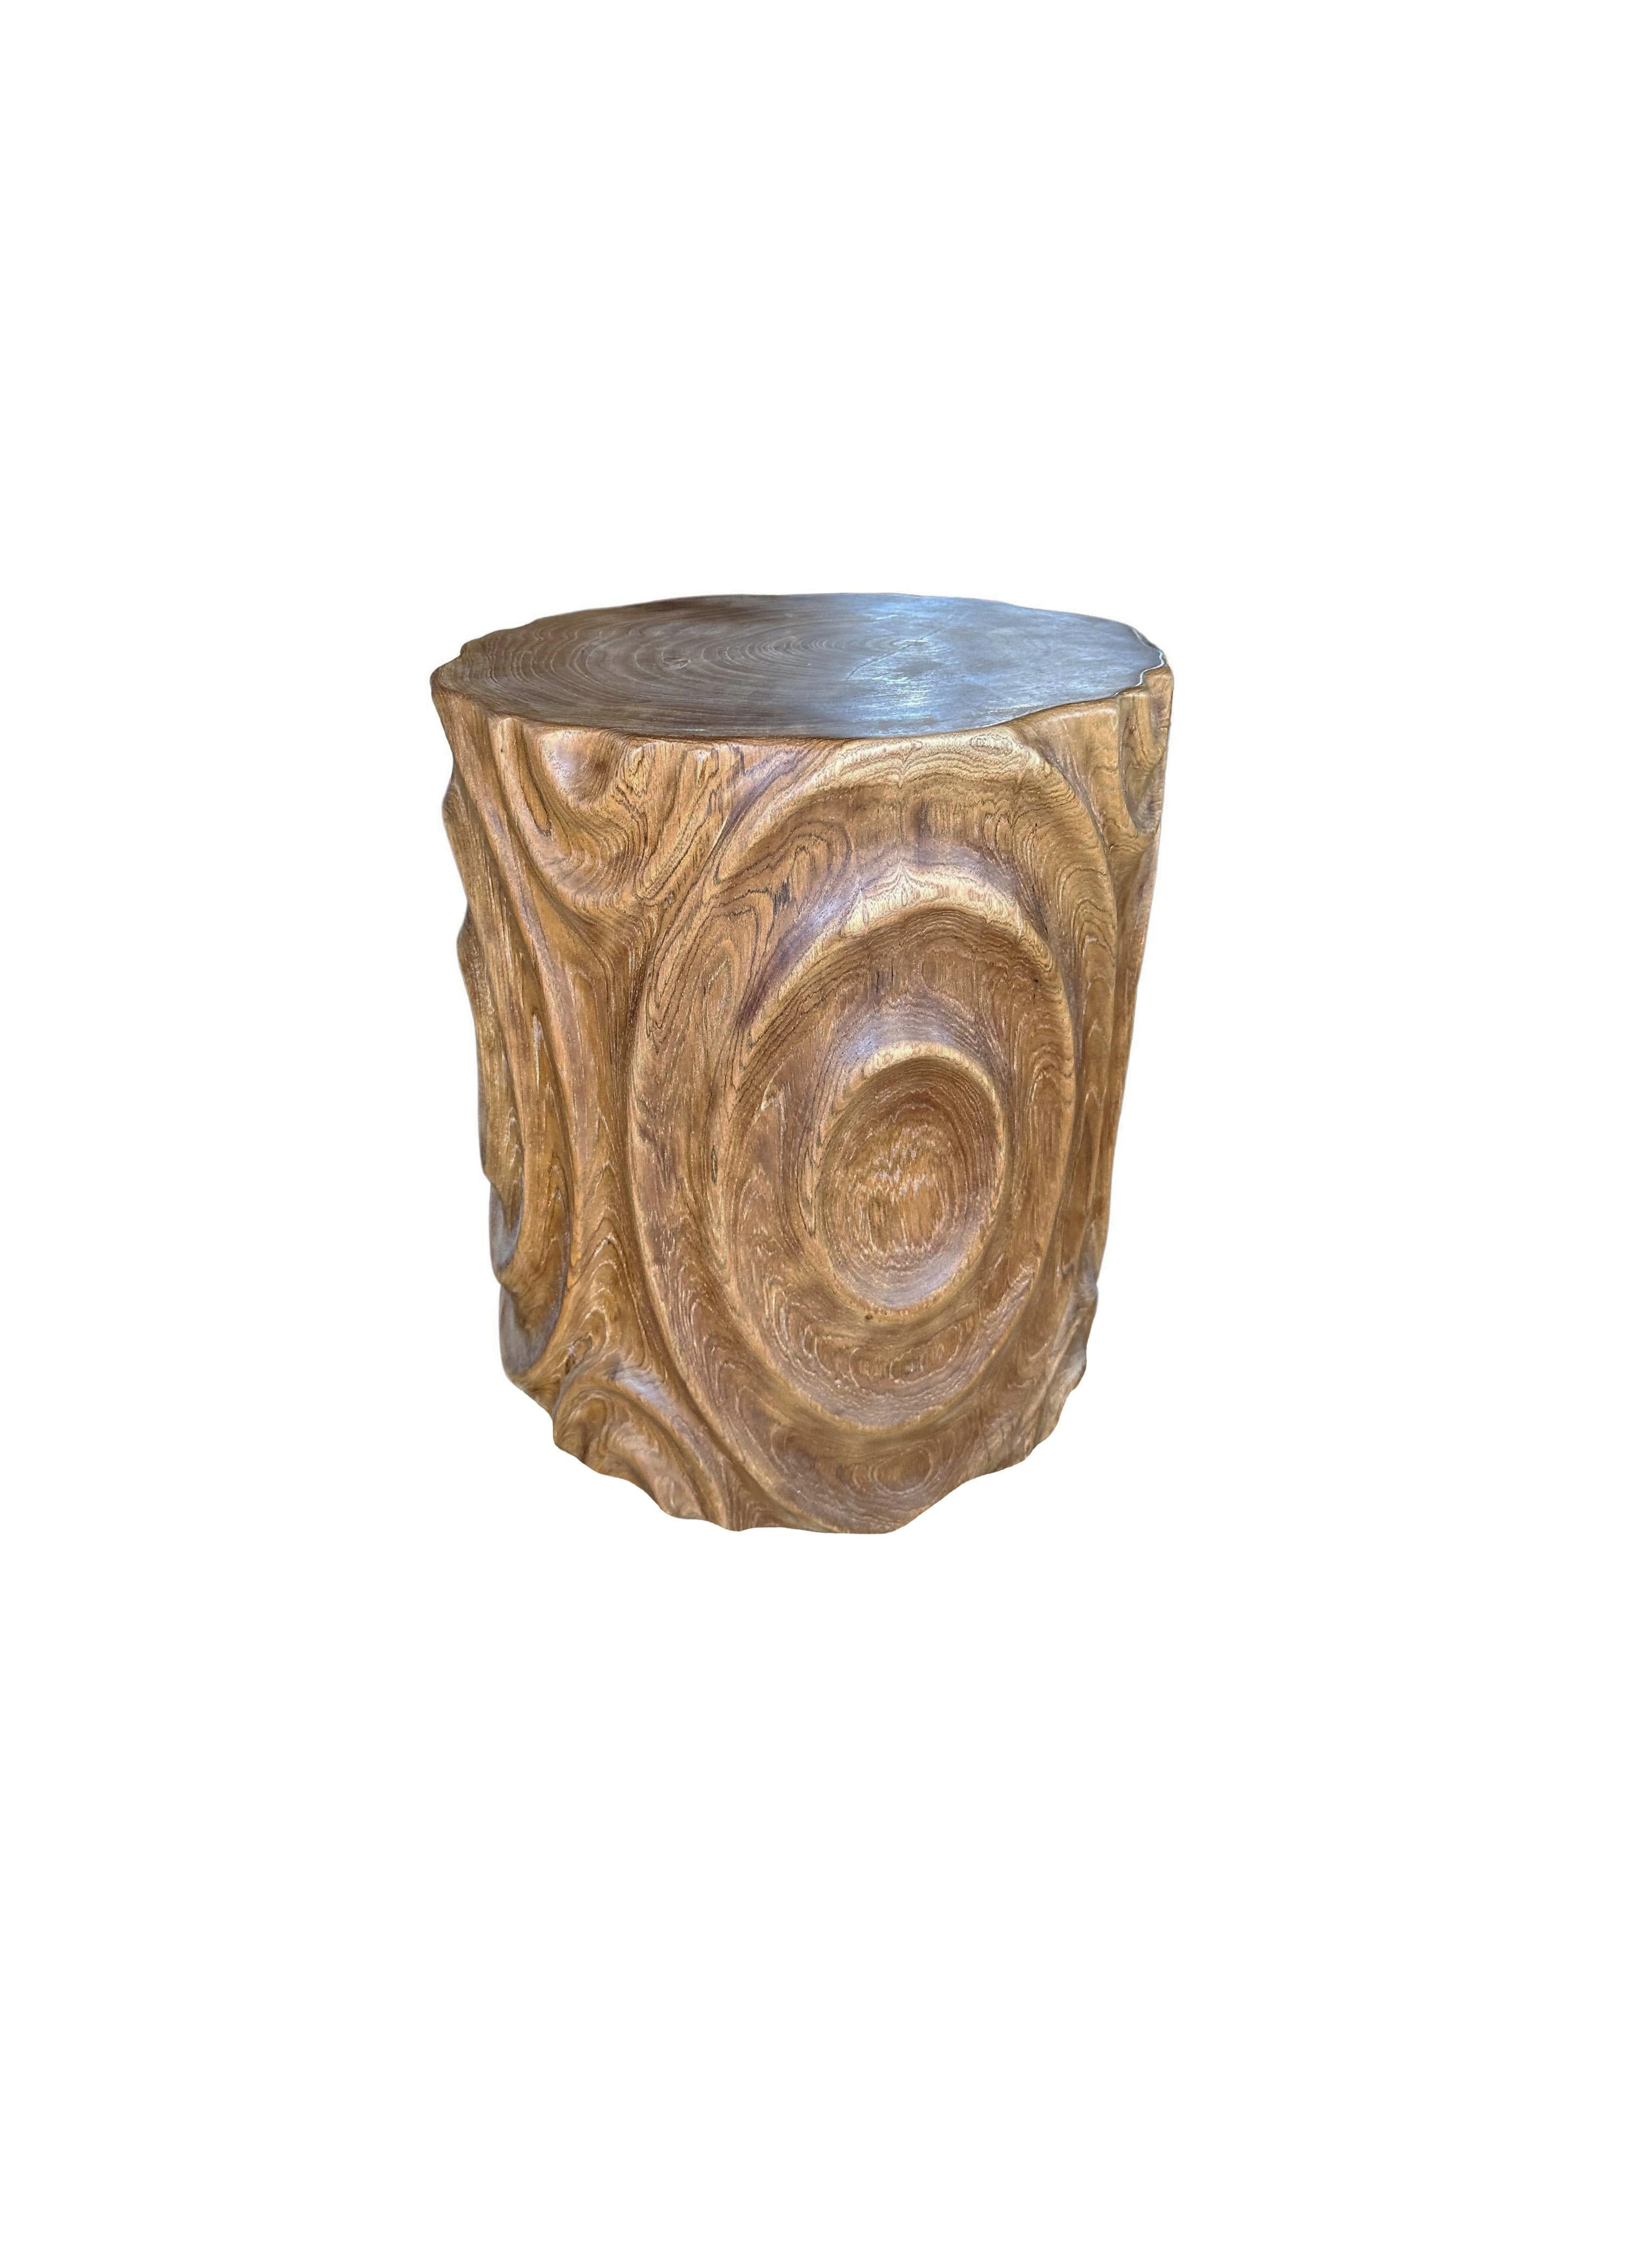 Hand-Crafted Solid Teak Wood Side Table with Stunning Textures, Modern Organic For Sale